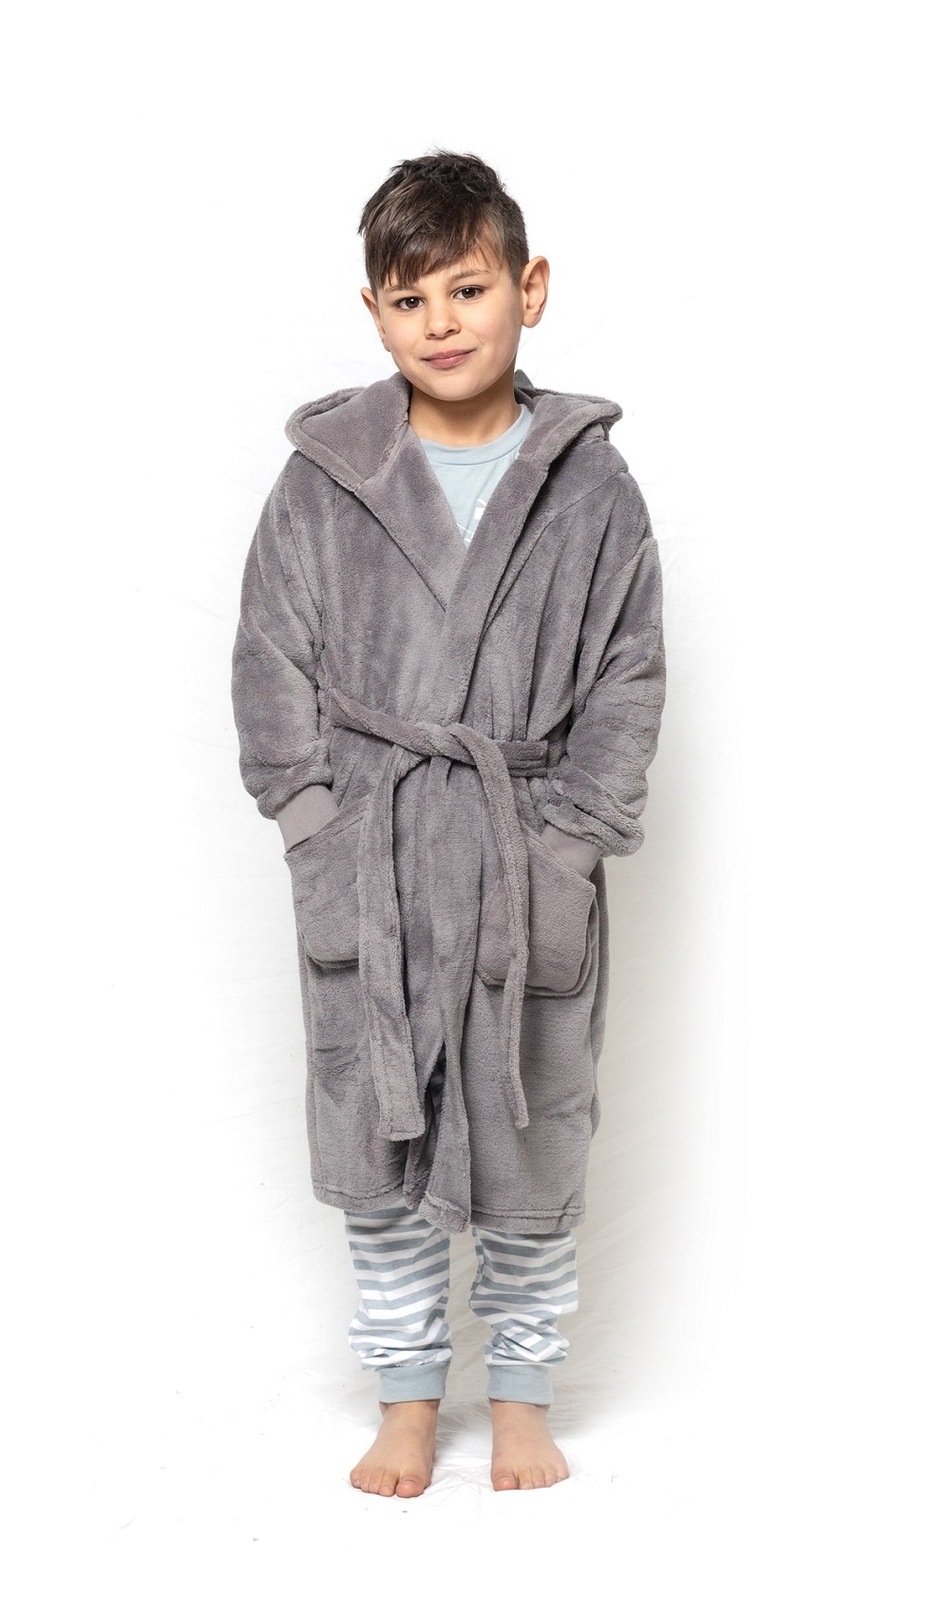 Buy TowelSelections Big Boys' Robe, Kids Plush Shawl Fleece Bathrobe Size 8  Alloy Online at Low Prices in India - Amazon.in